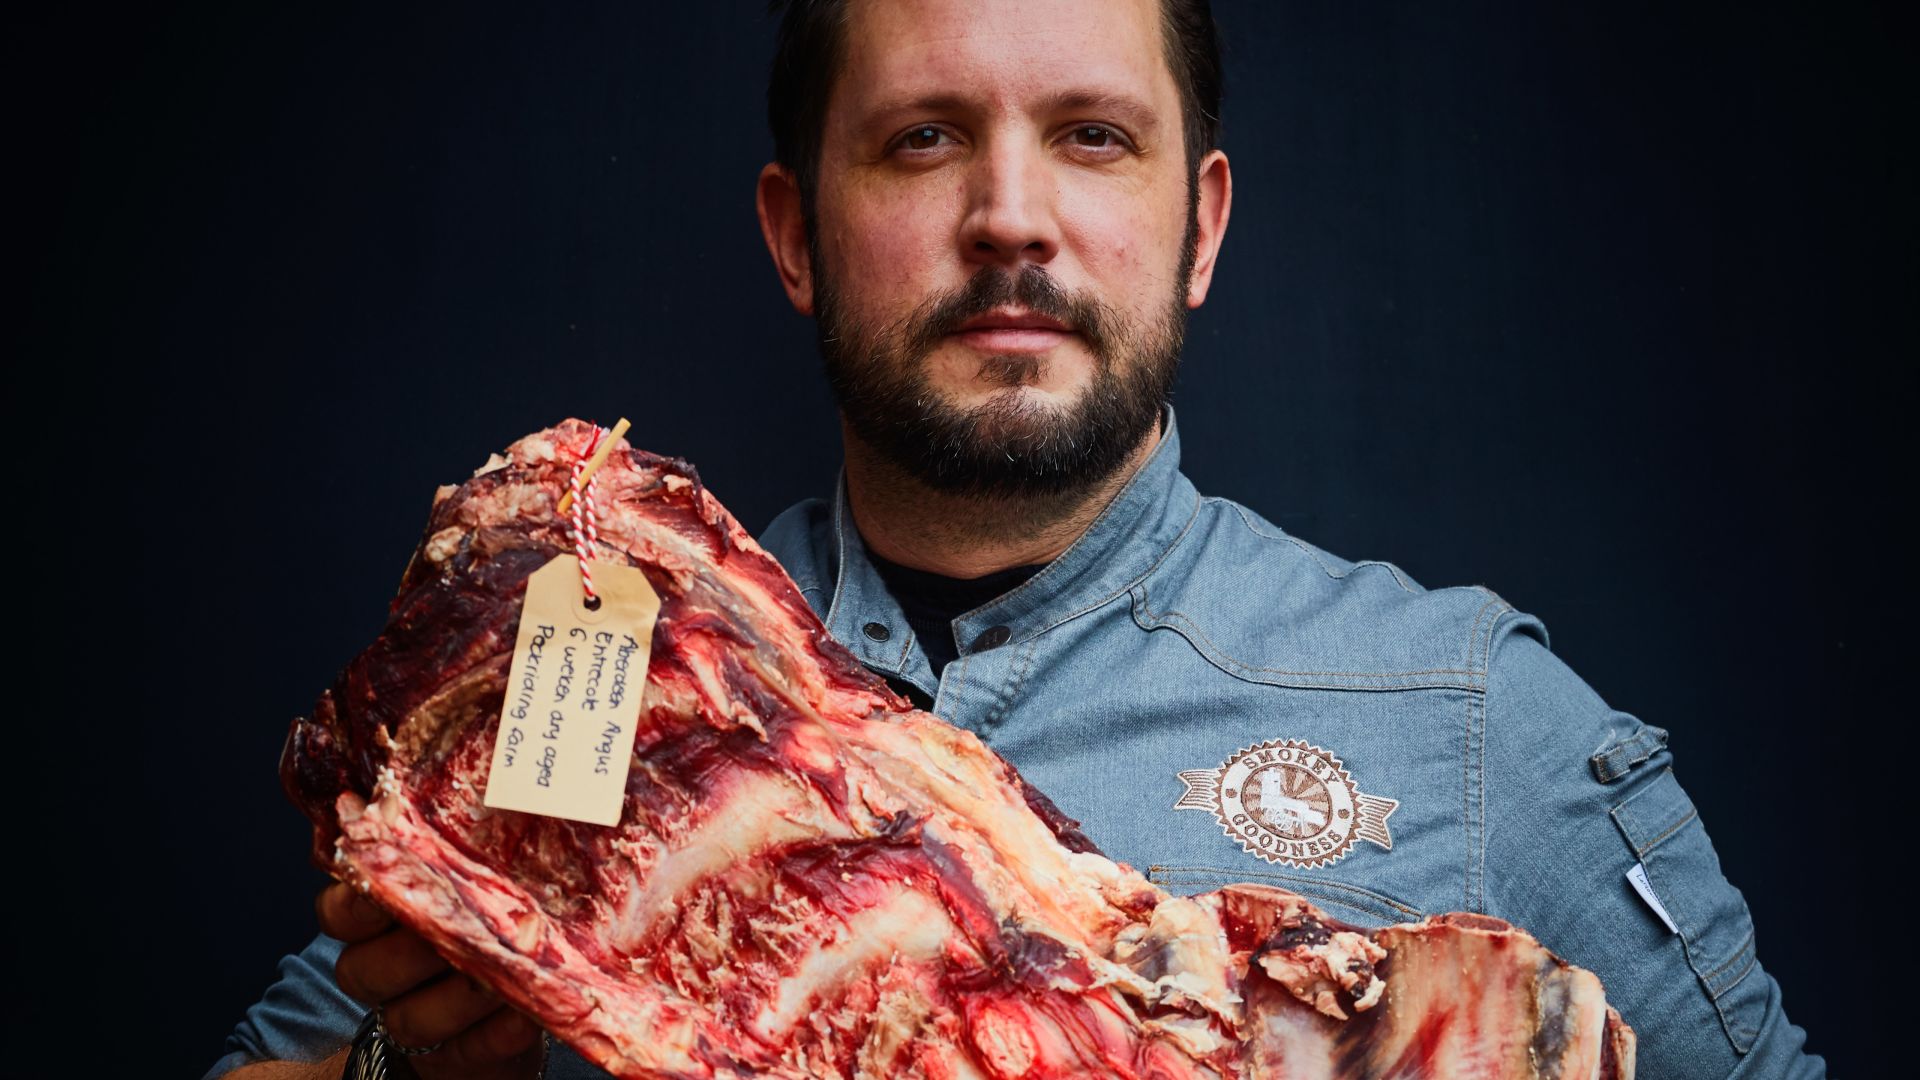 Jord Althuizen Holding A Large Piece Of Meat